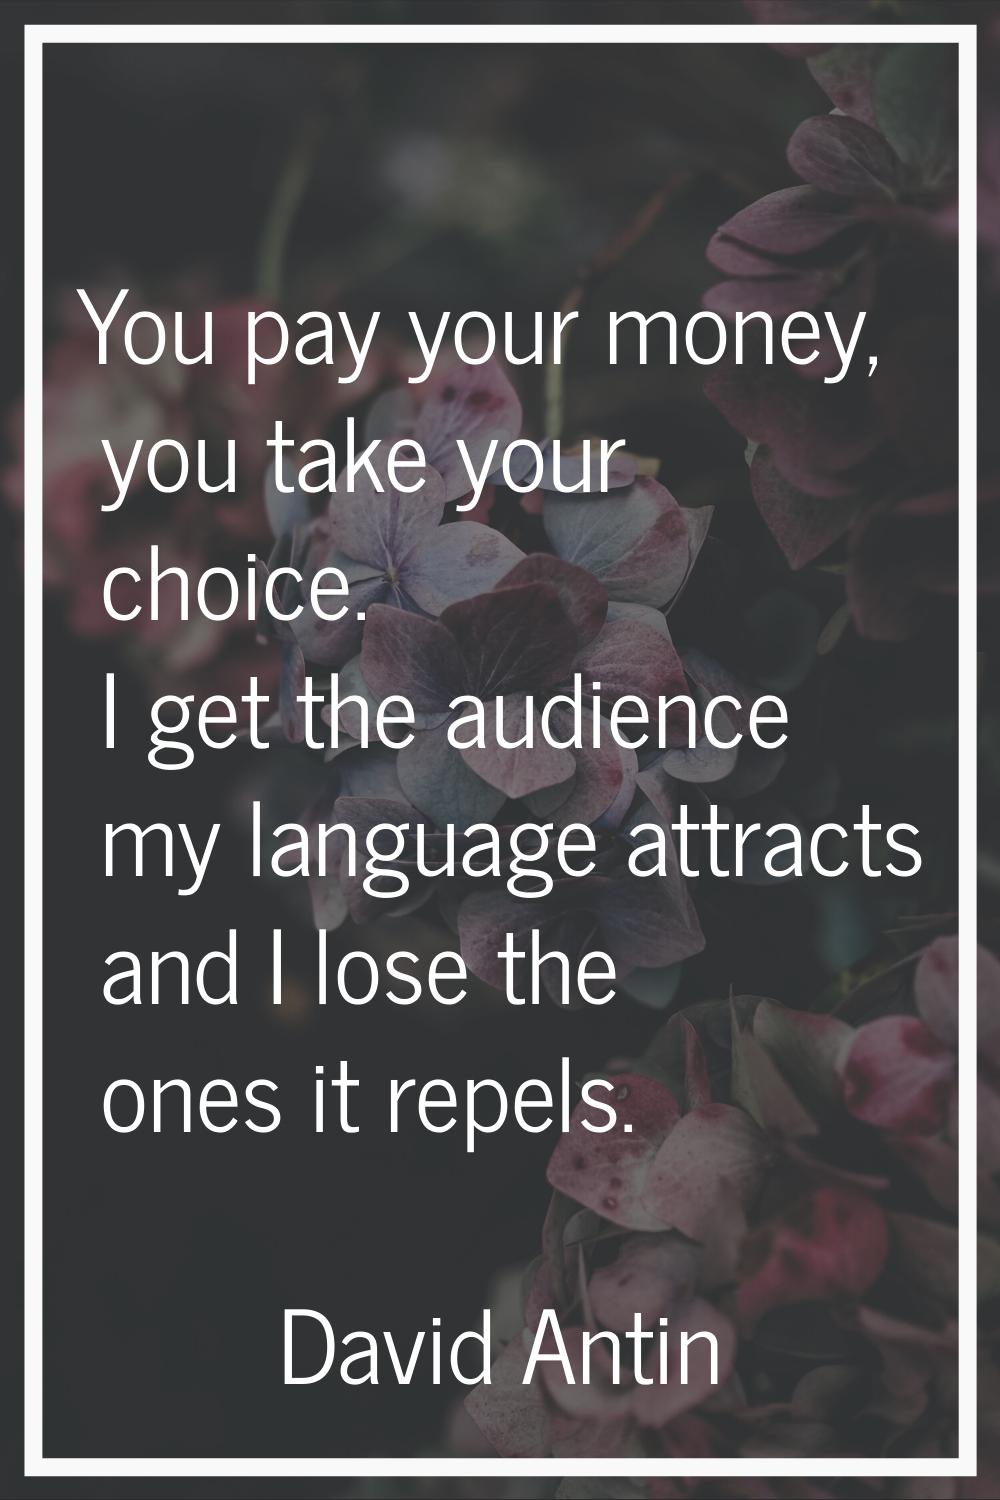 You pay your money, you take your choice. I get the audience my language attracts and I lose the on